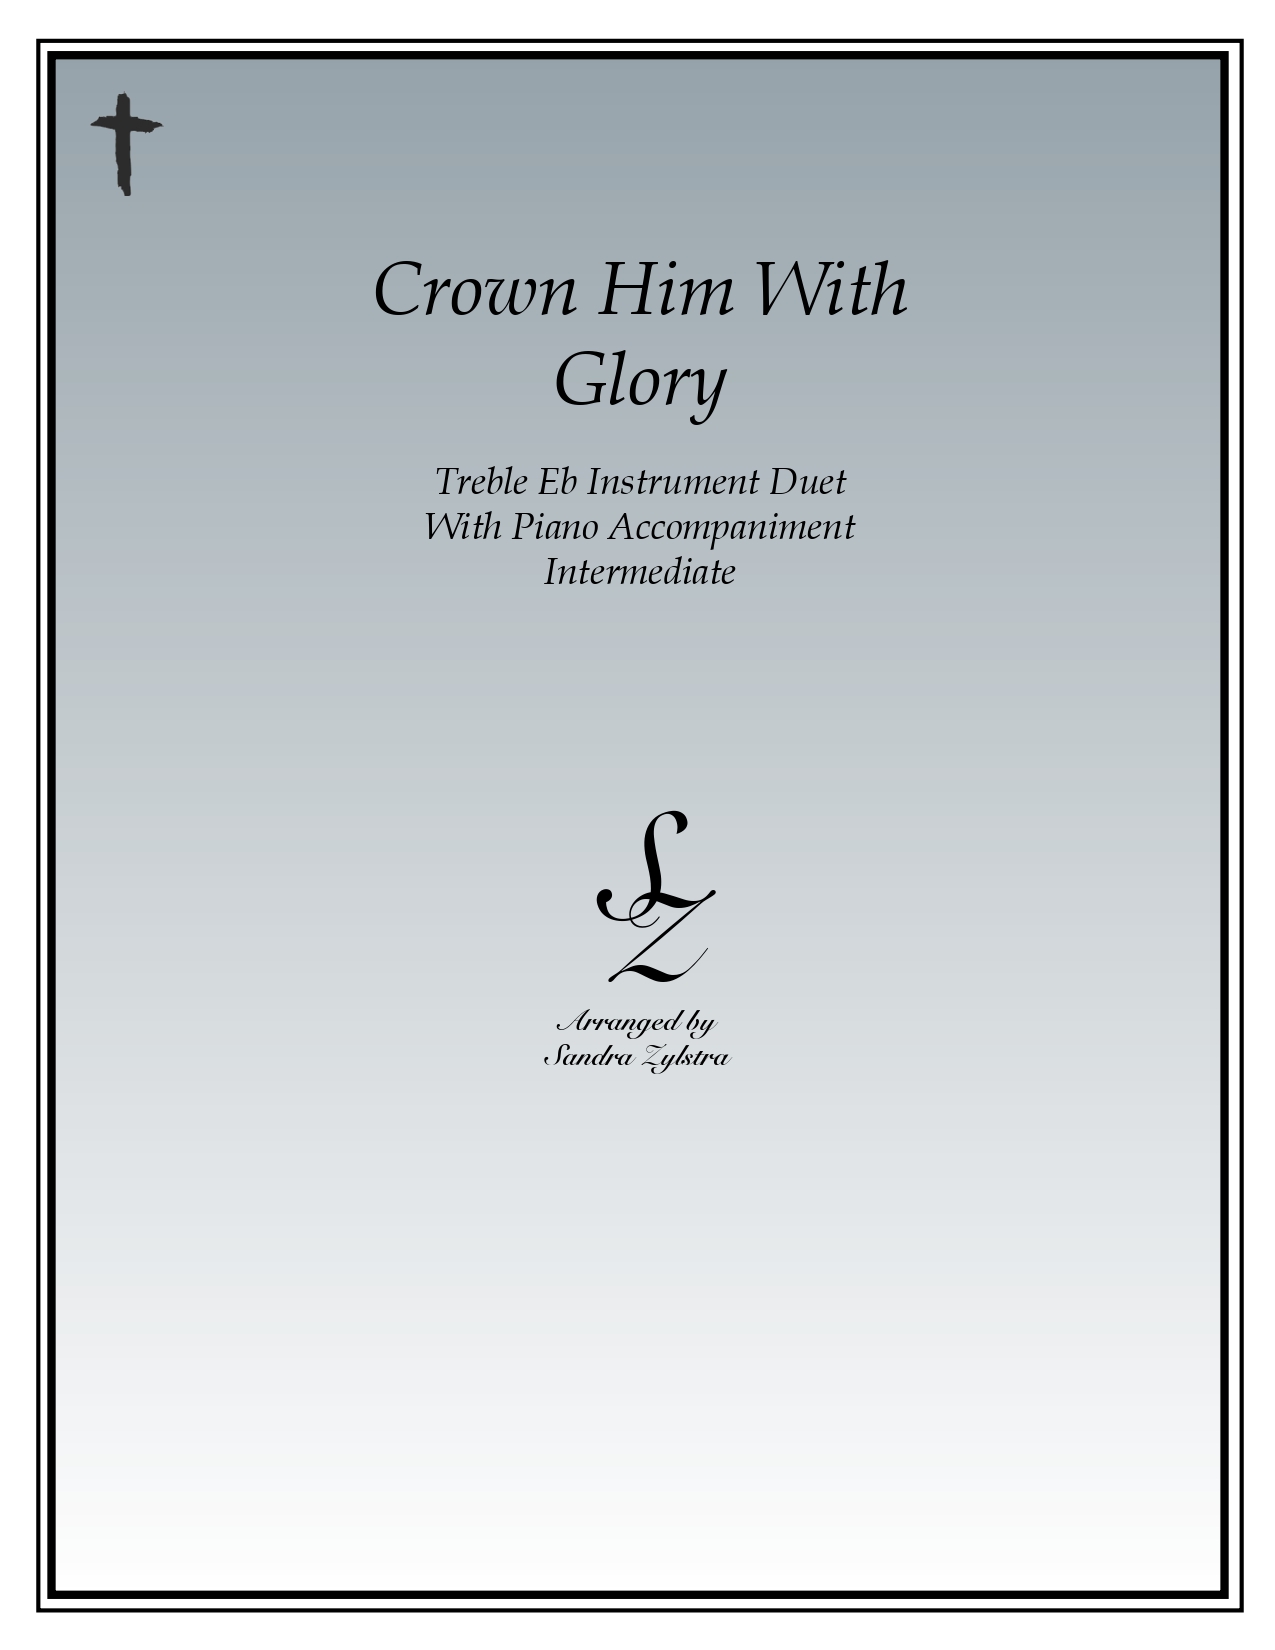 Crown Him With Glory Eb instrument duet parts cover page 00011